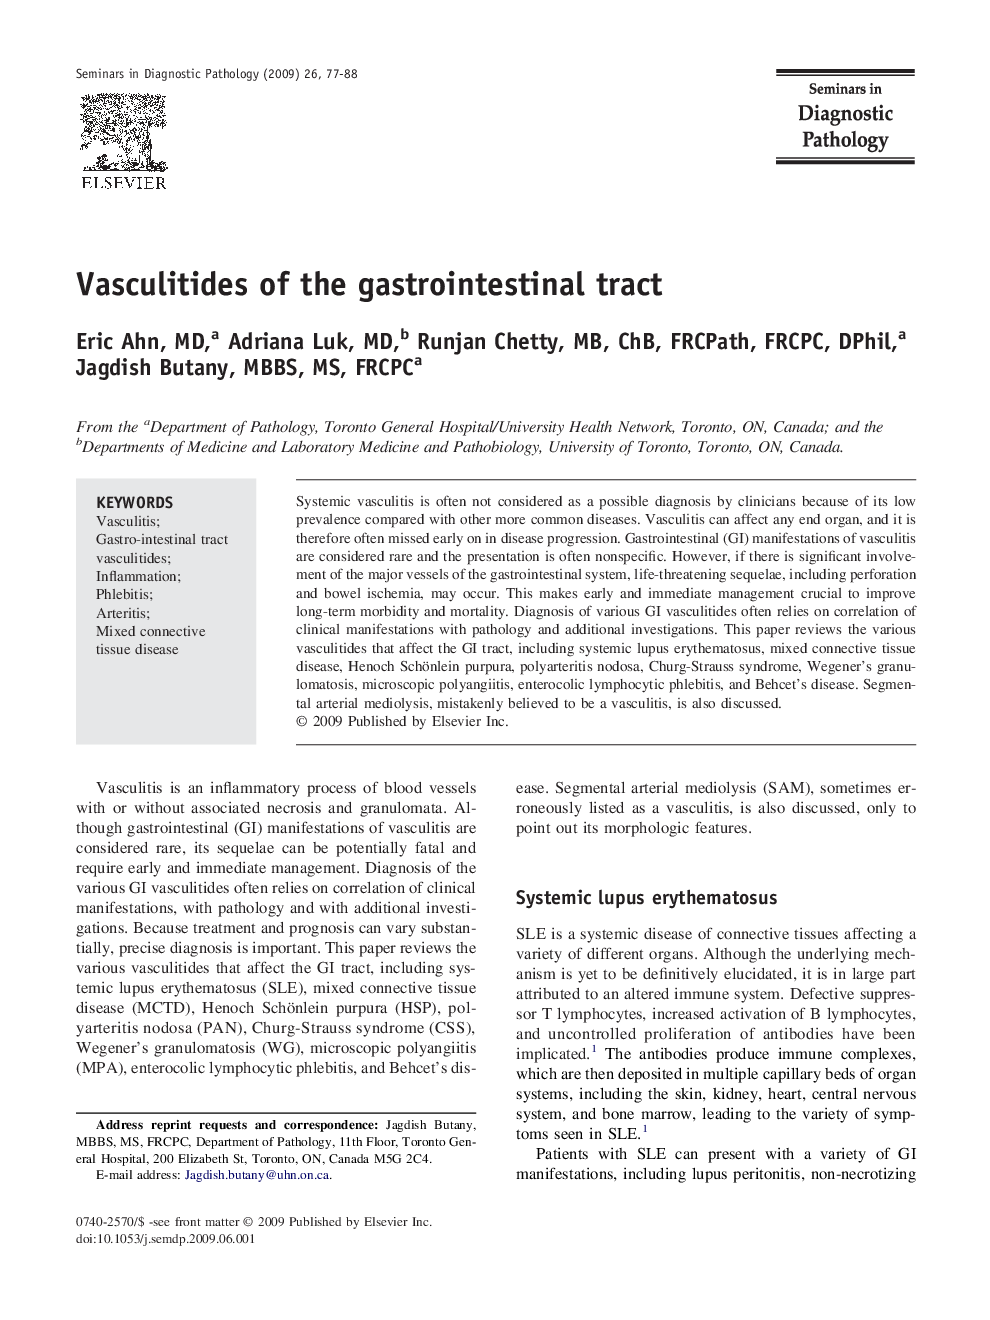 Vasculitides of the gastrointestinal tract